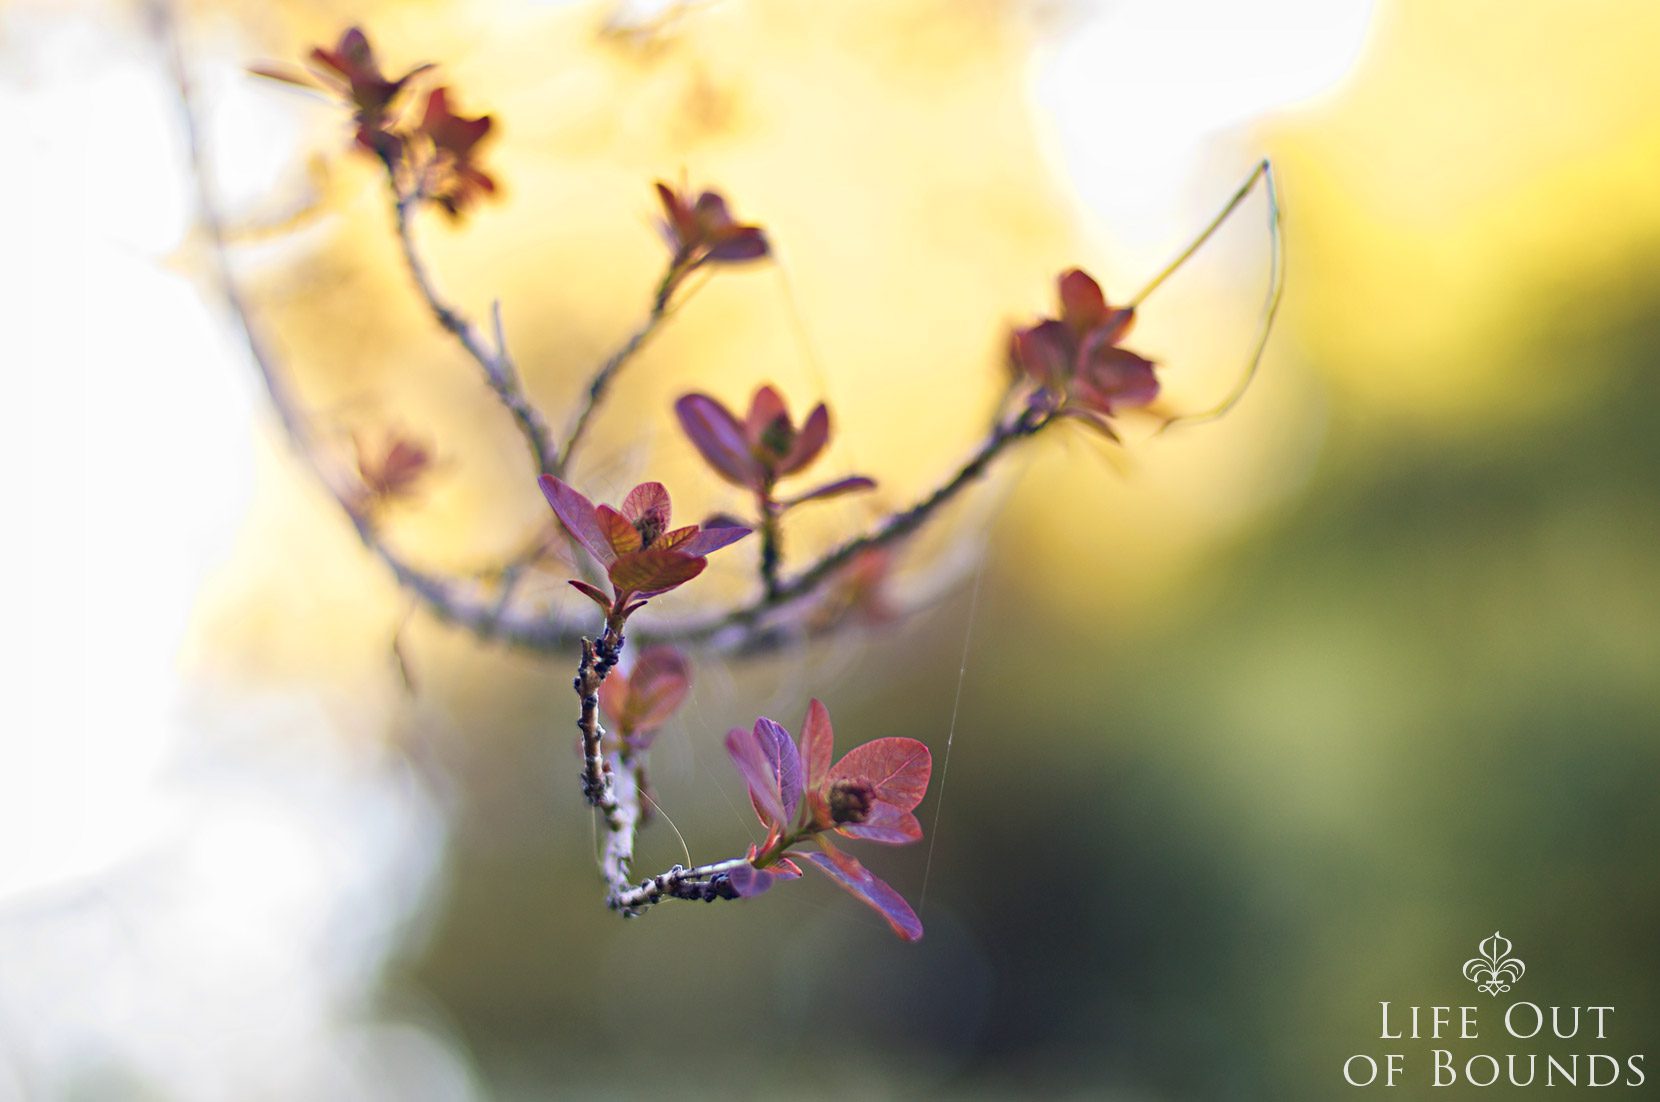 New-life-on-a-tree-in-the-early-spring-garden-Napa-California